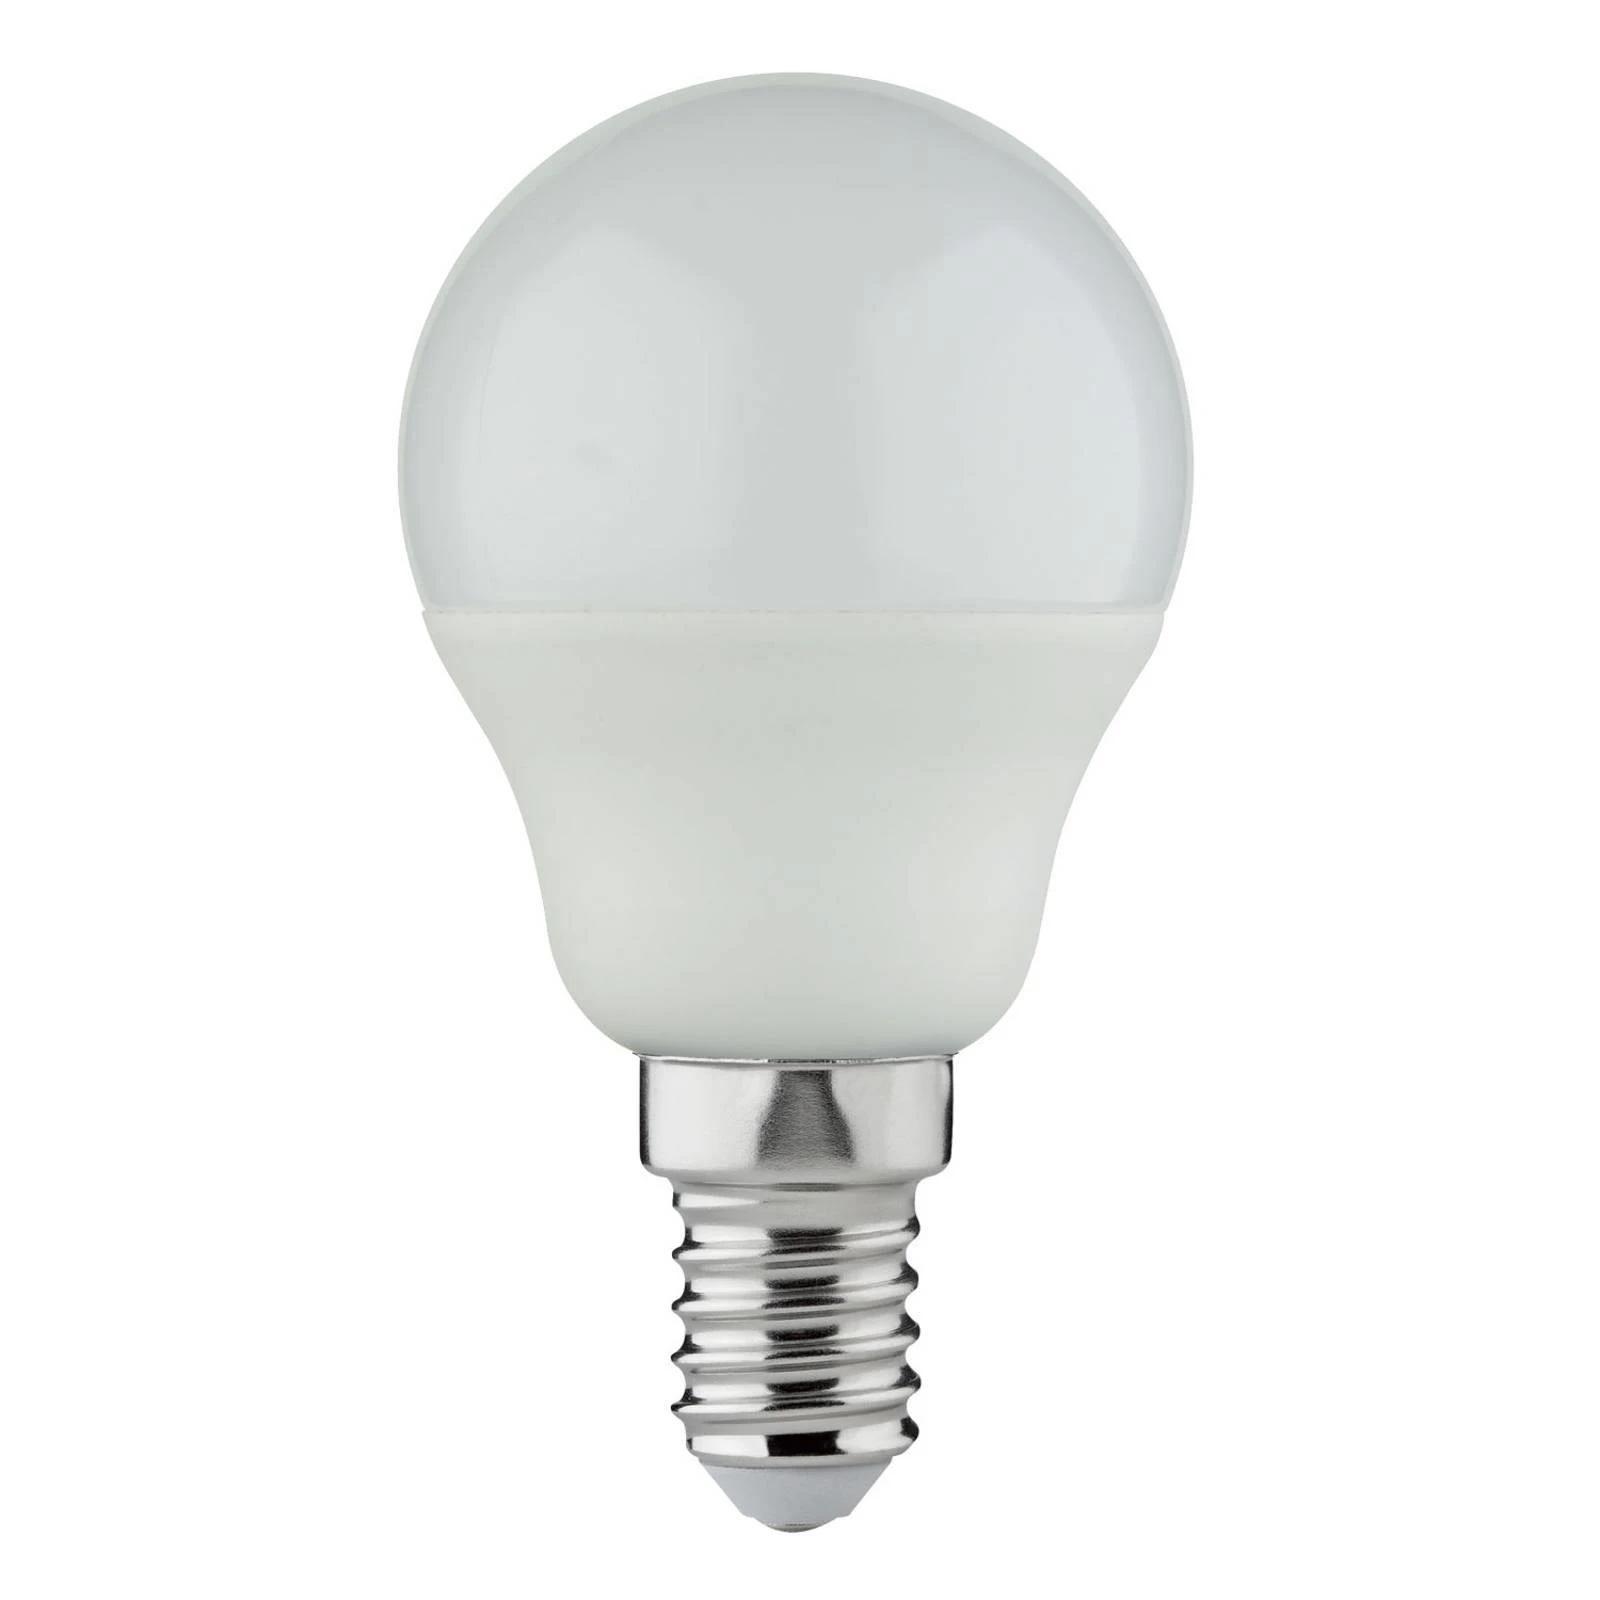 g4 led bulb 10w equivalent - 36 results